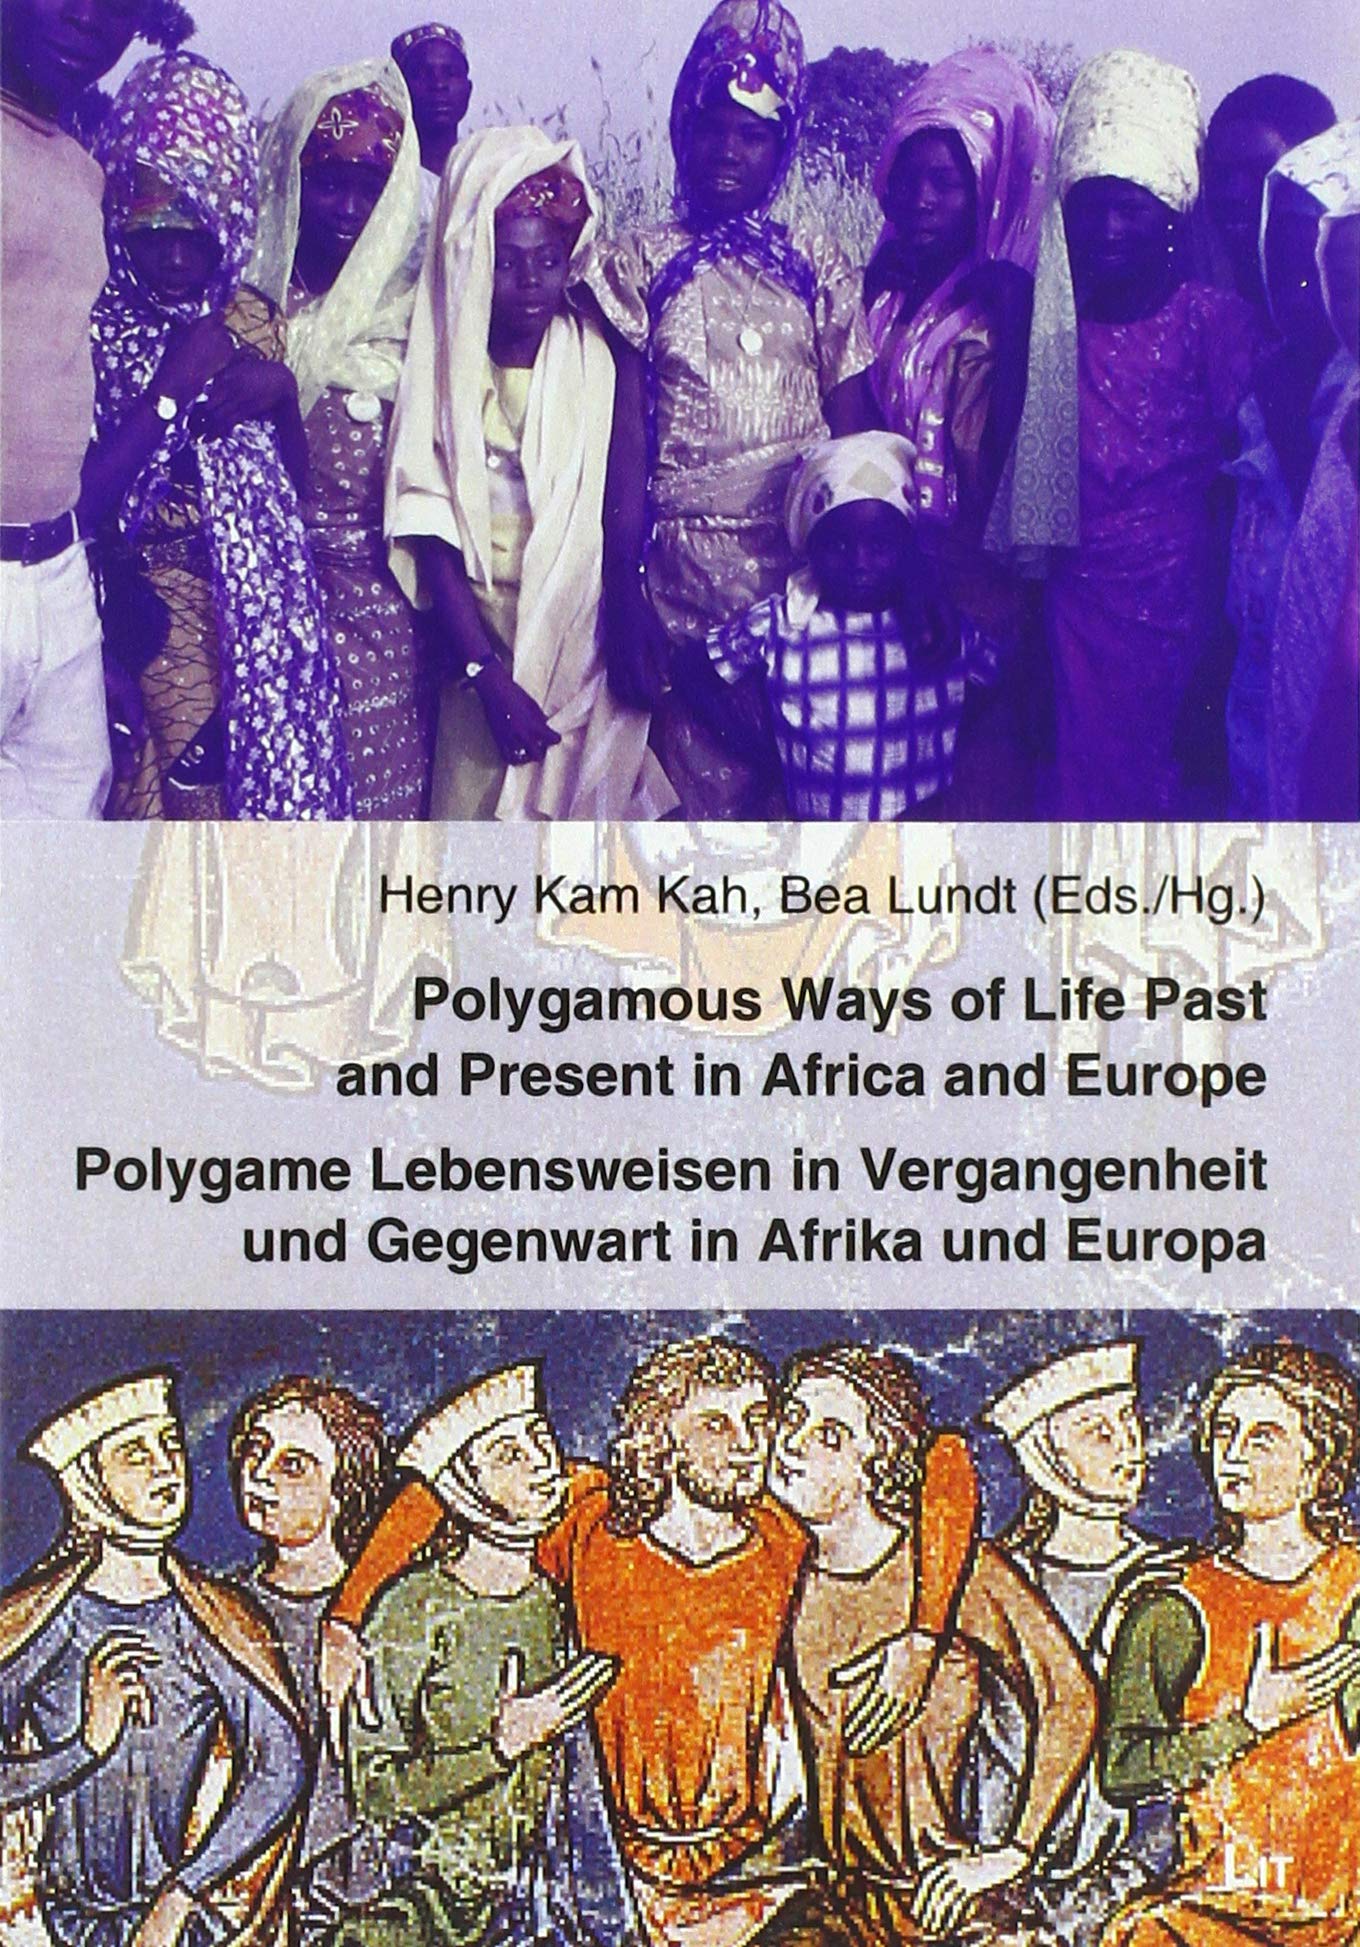 Polygamous ways of life past and present in Africa and Europe.jpg